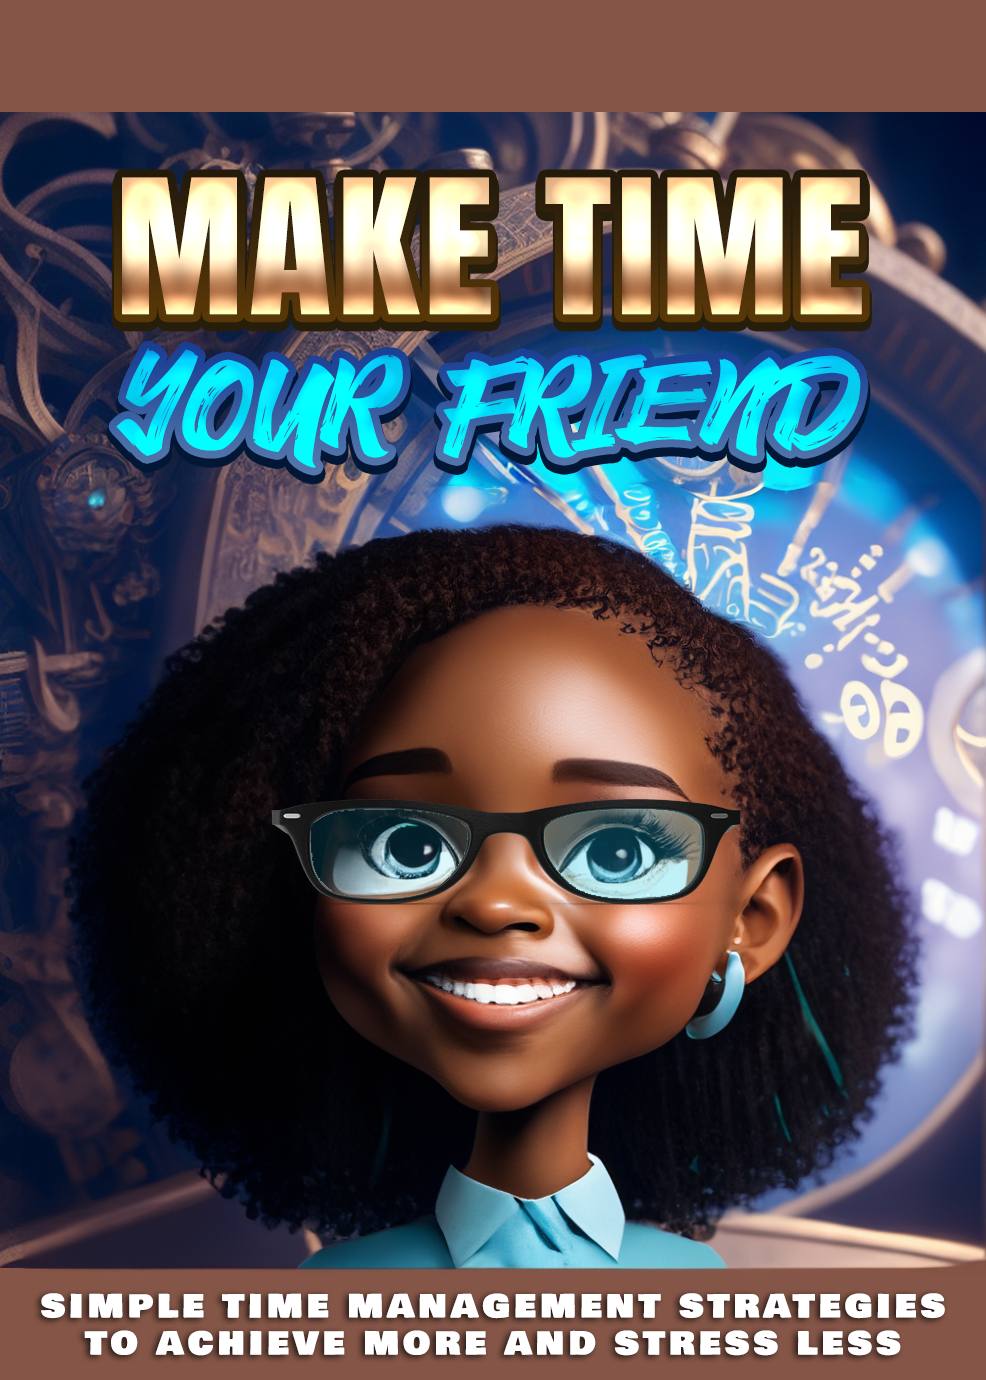 NEW! License - Make Time Your Friend